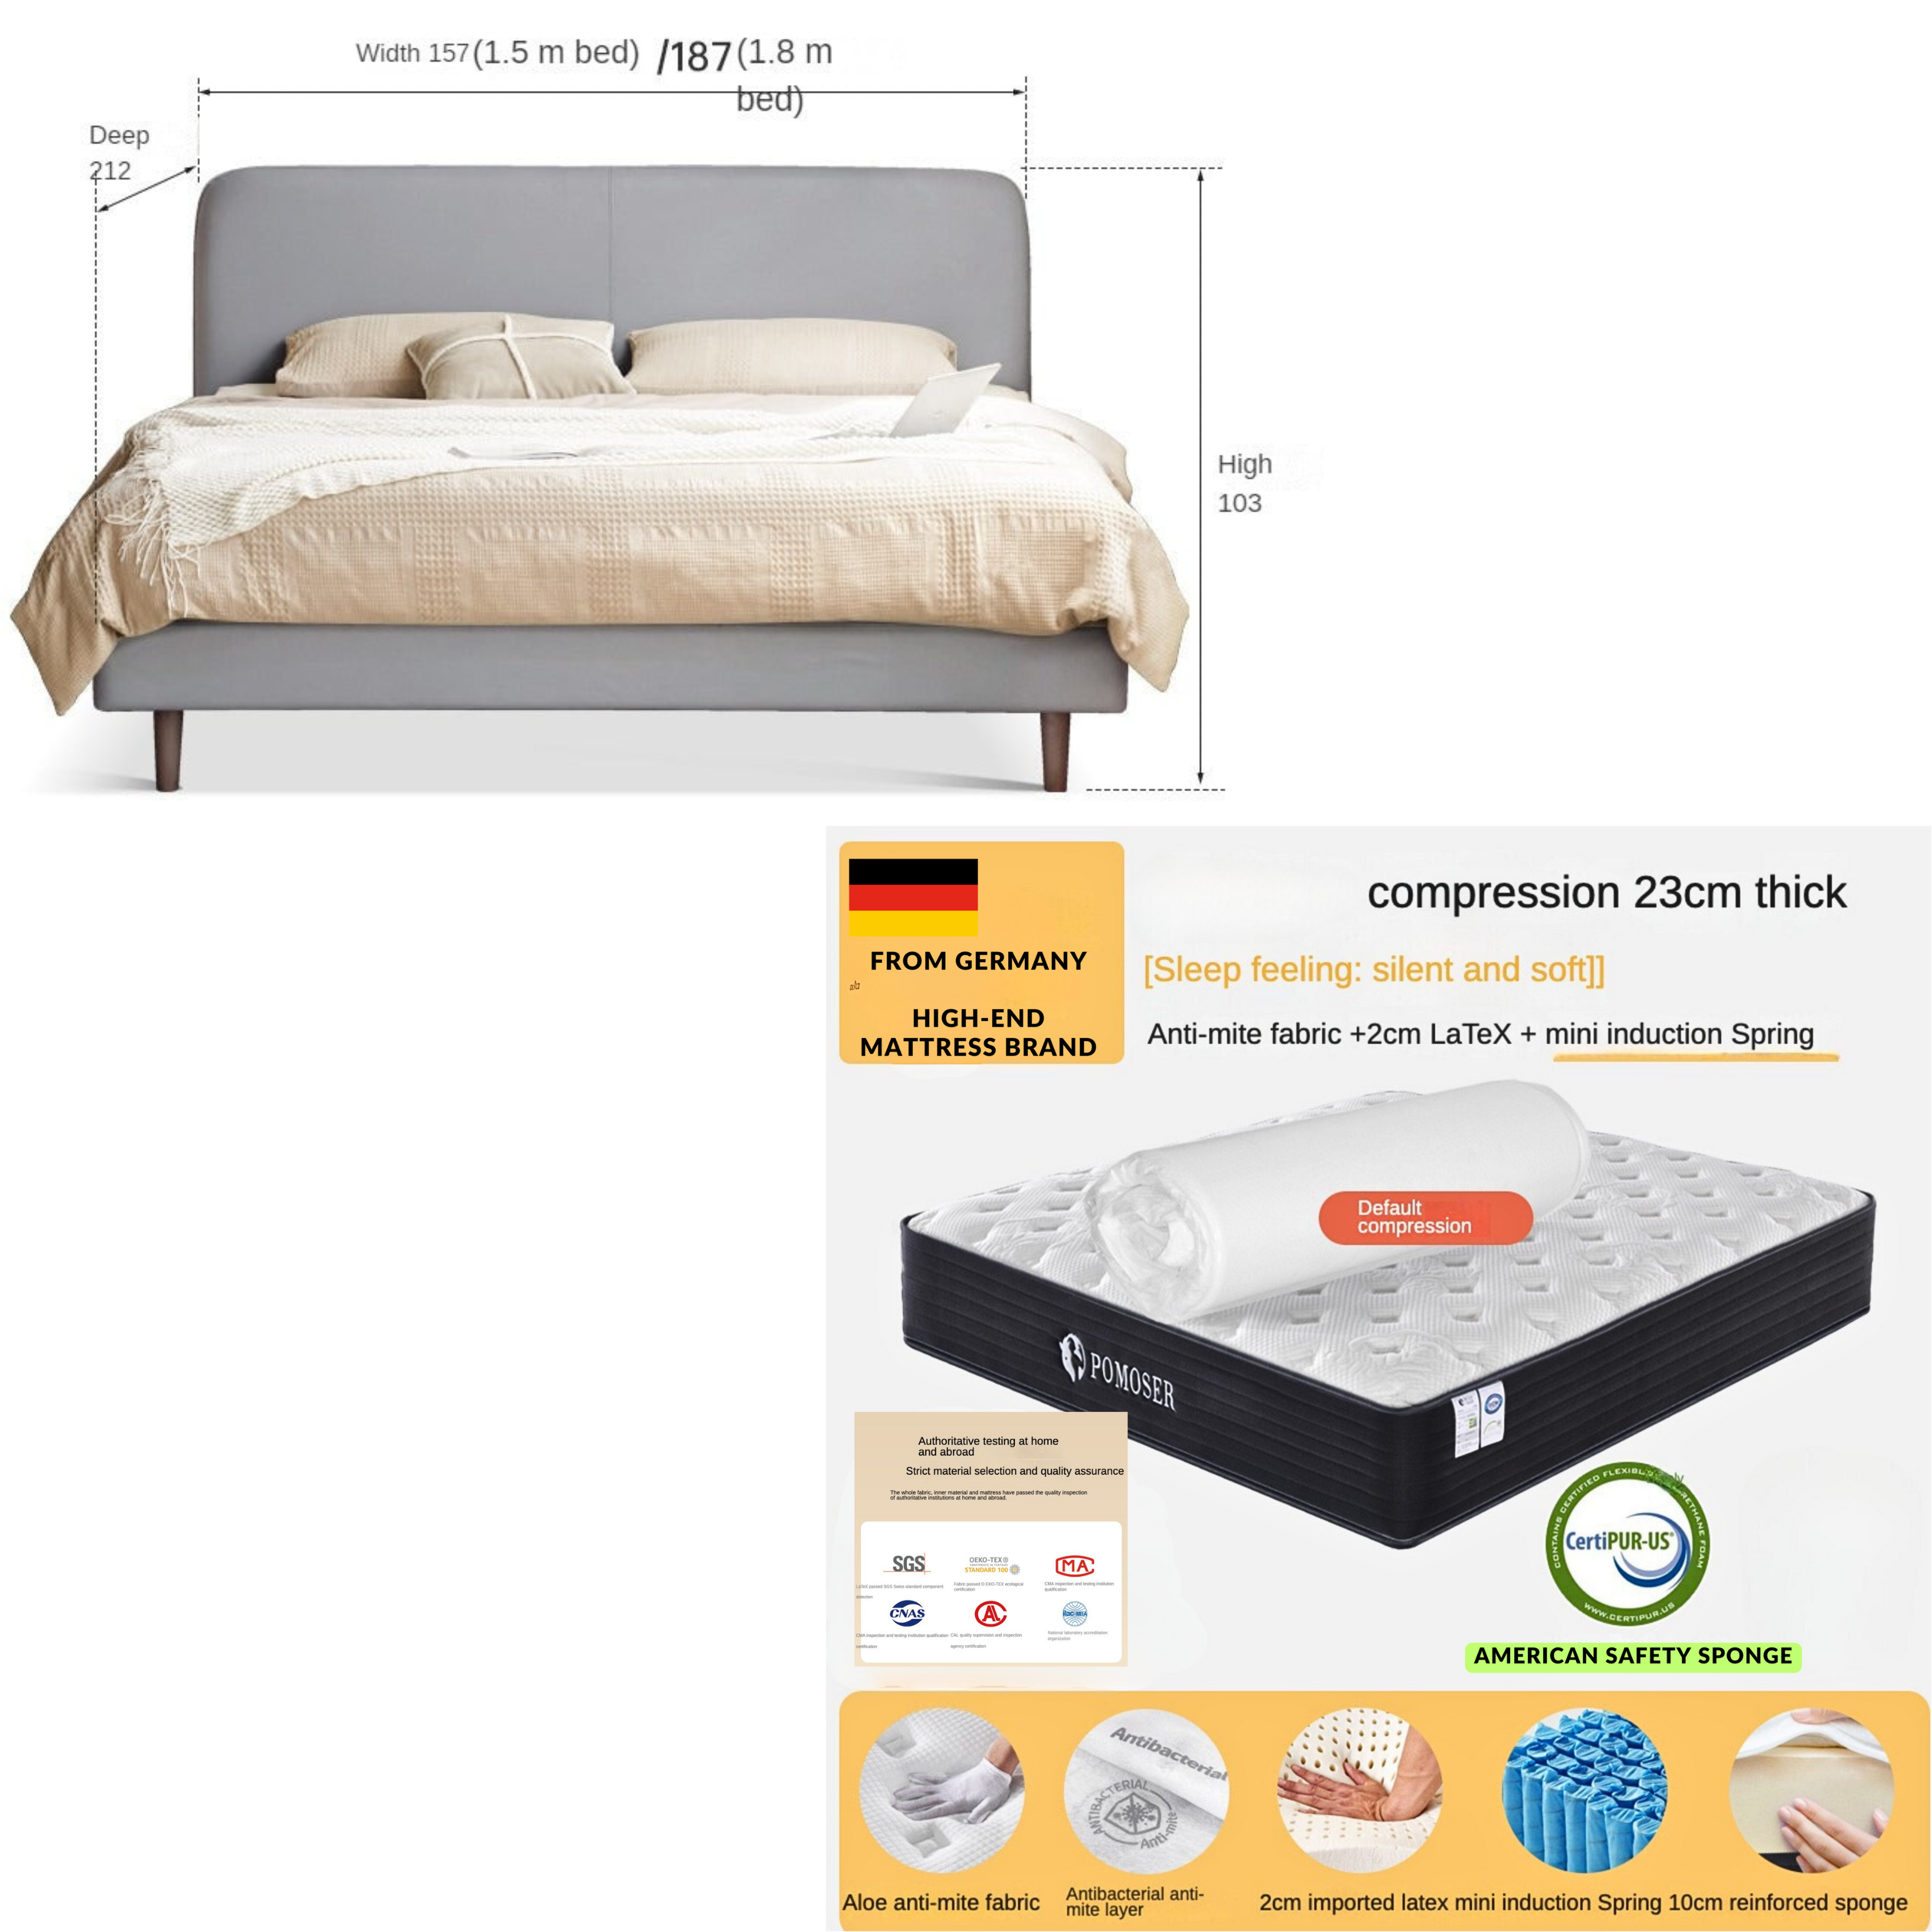 Technology Cloth Soft Bed, Floor to Floor Cream Style  bed")